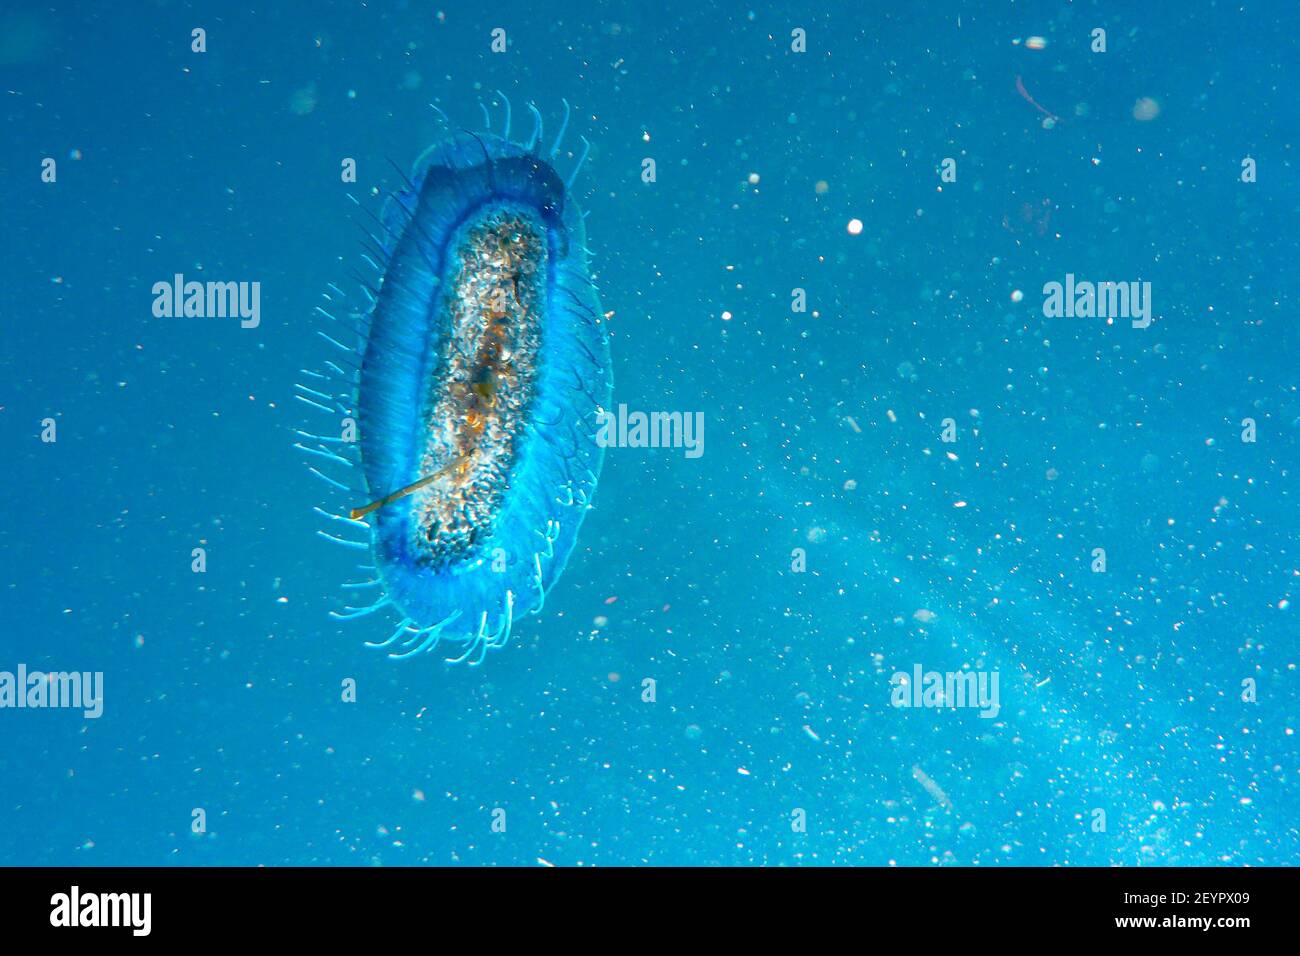 A blue siphonophore fish swimming in the sea Stock Photo